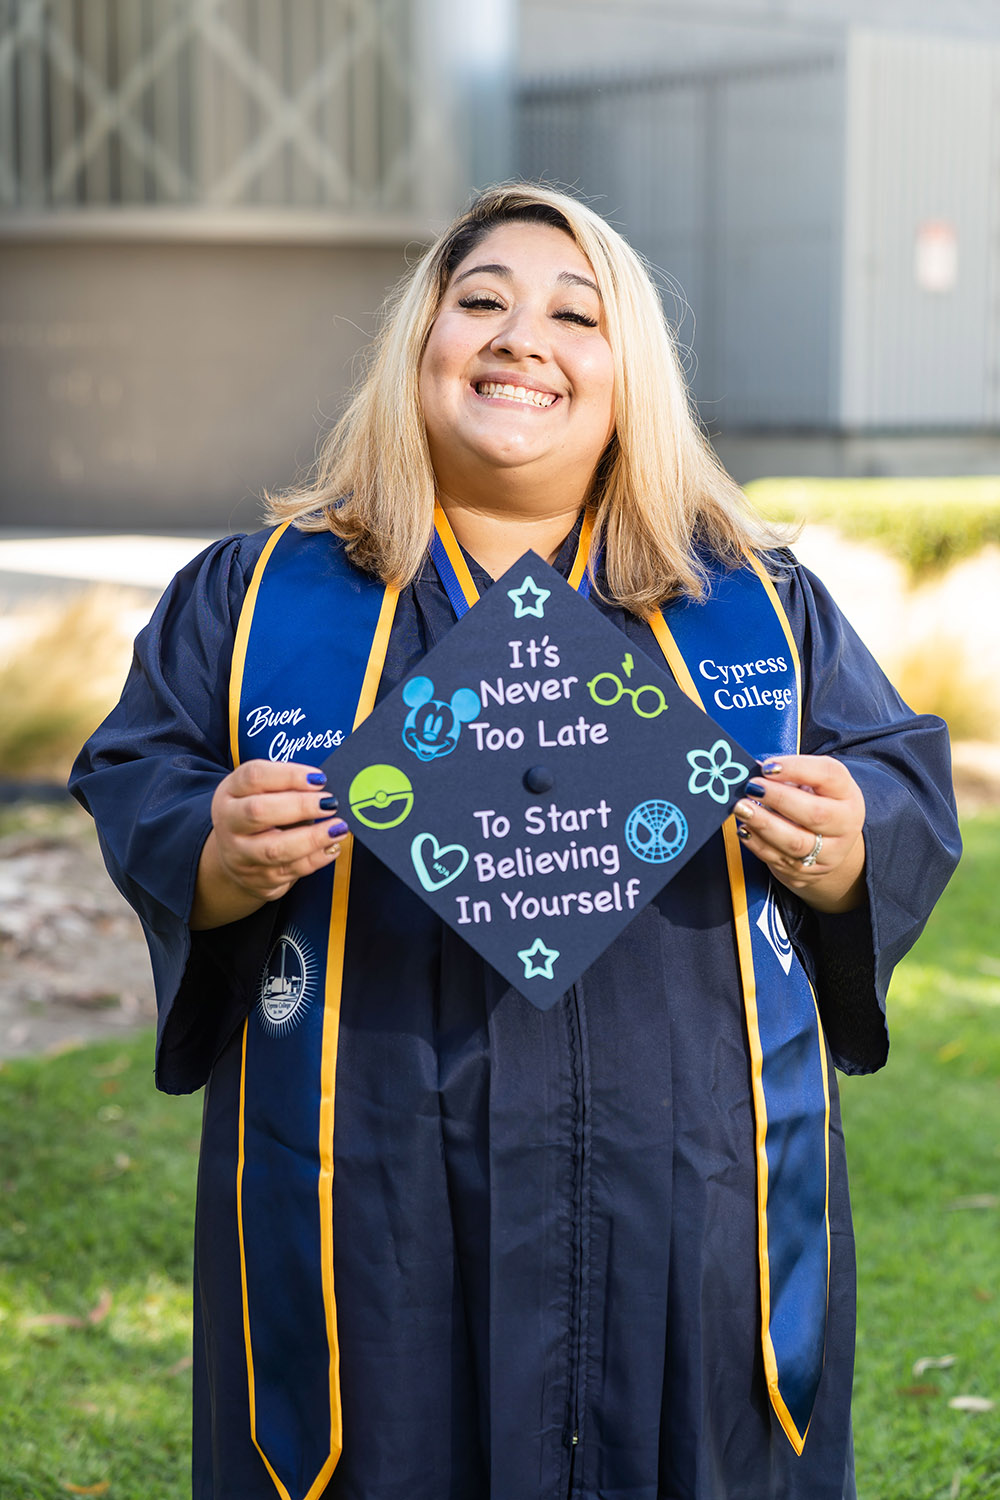 A woman in graduation regalia shines a bright smile as she holds up her mortarboard, which is decorated with the words: "It's never too late to start believing in yourself."